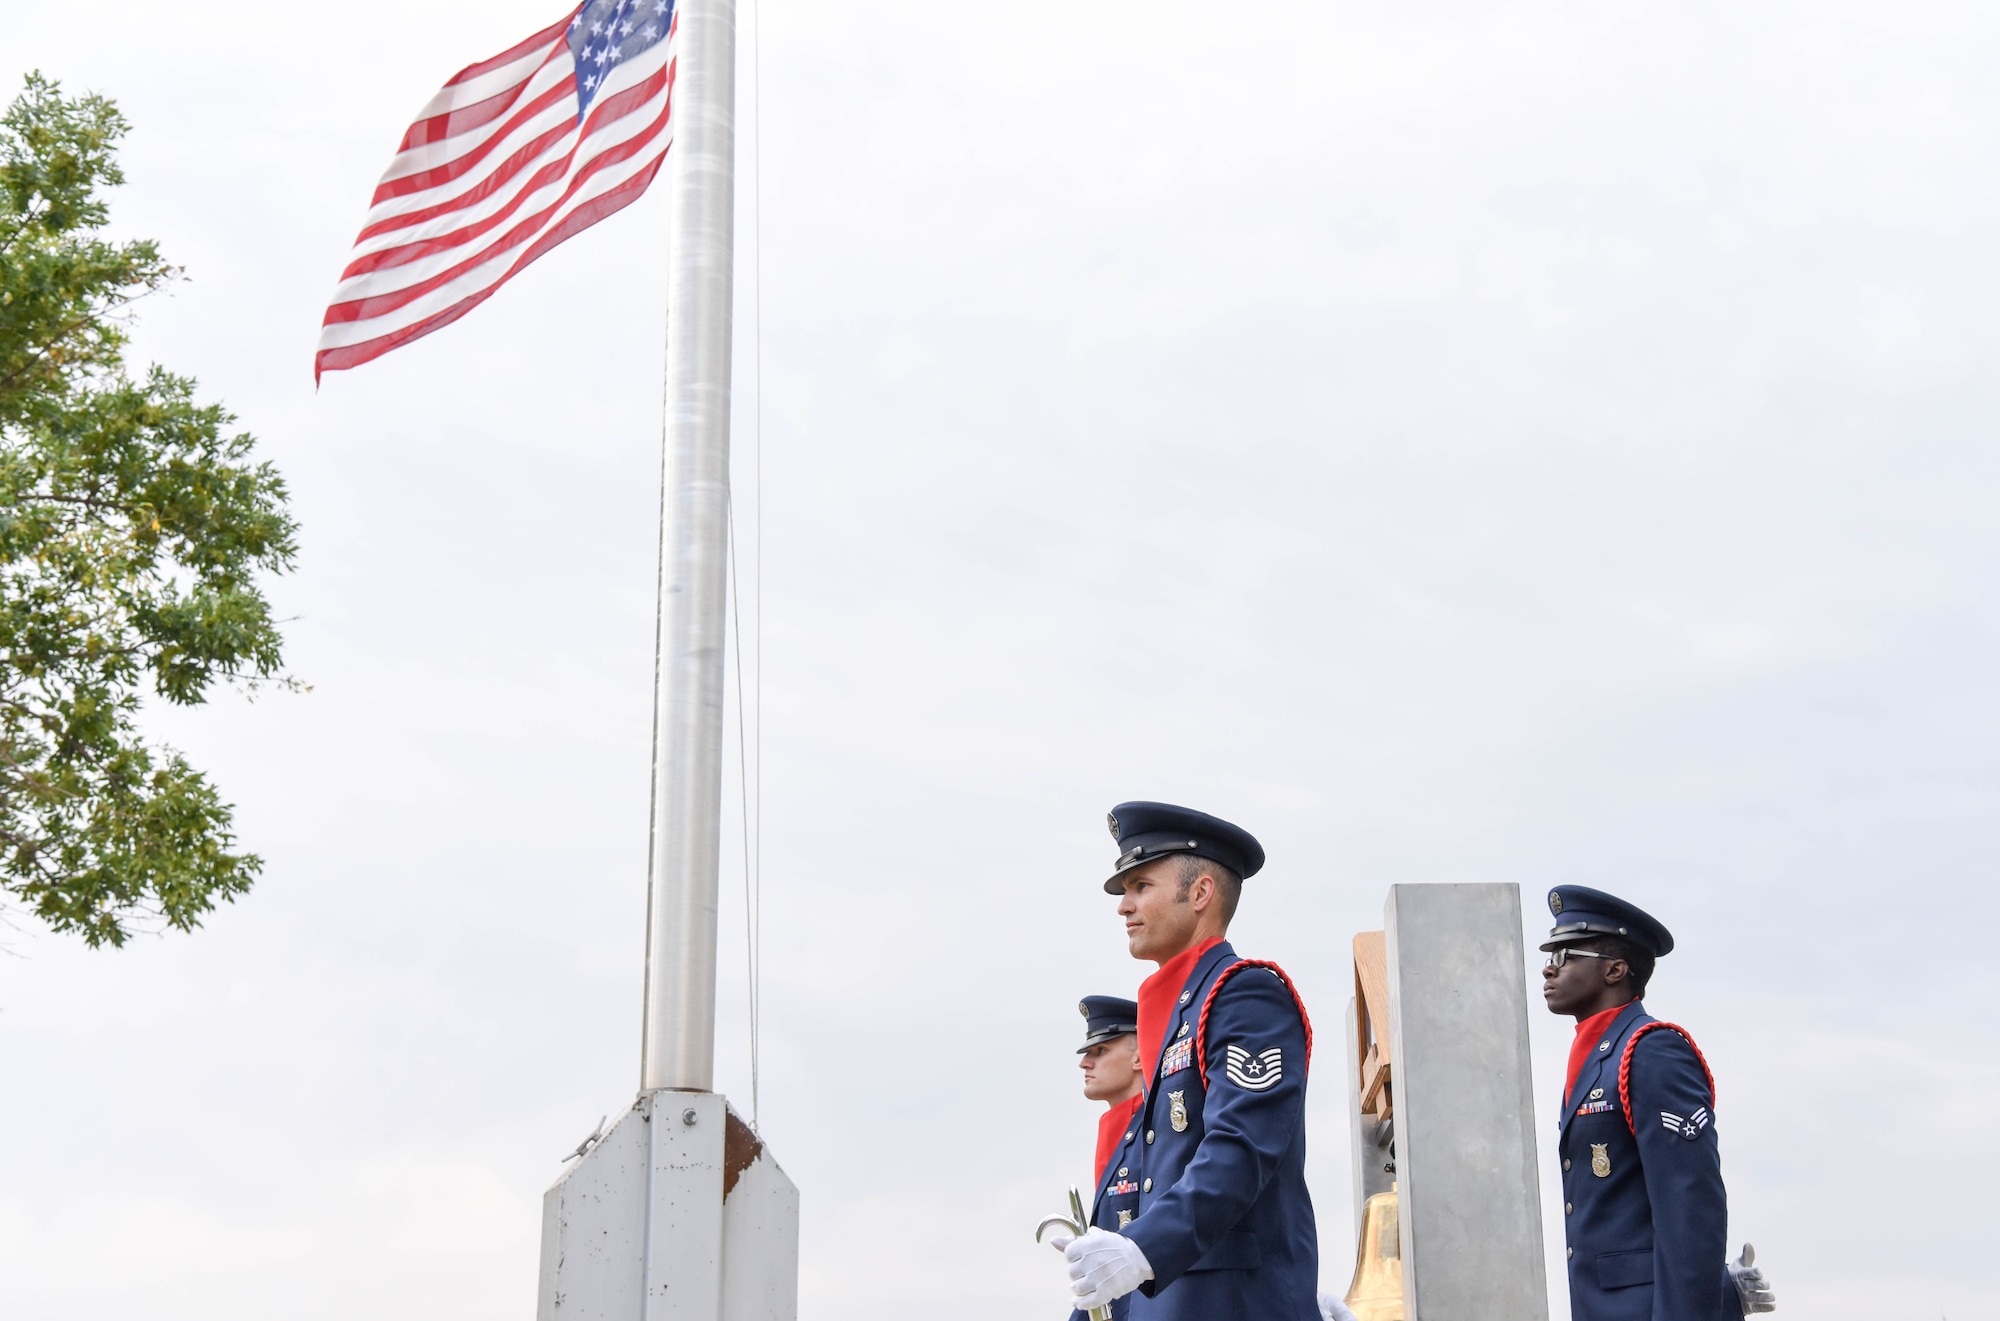 Members of the 28th Civil Engineer Squadron fire department stand for a moment of silence outside of the 28th Bomb Wing headquarters at Ellsworth Air Force Base, S.D., Sept. 11, 2018. The flag is flown at half-staff in honor of the people that lost their lives as a result of the 9/11 terrorist attack. (U.S. Air Force photo by Airman Christina Bennett)